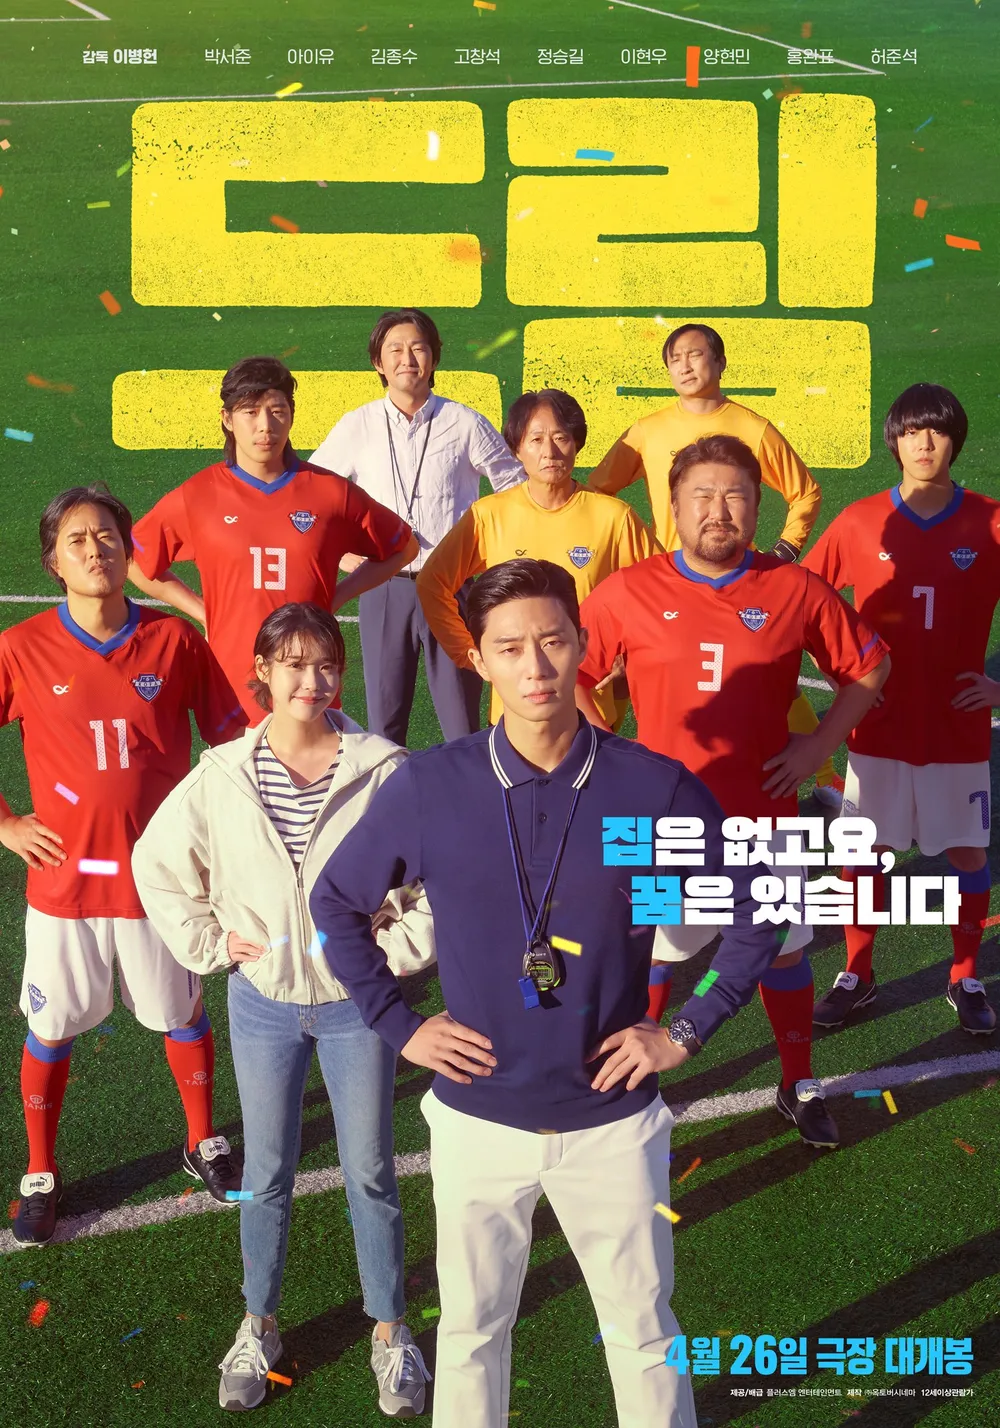 Feel Good Soccer K-movie Dream with Park Seo Joon and IU Tops the South Korea Box Office in First Weekend of Premiere | KWriter